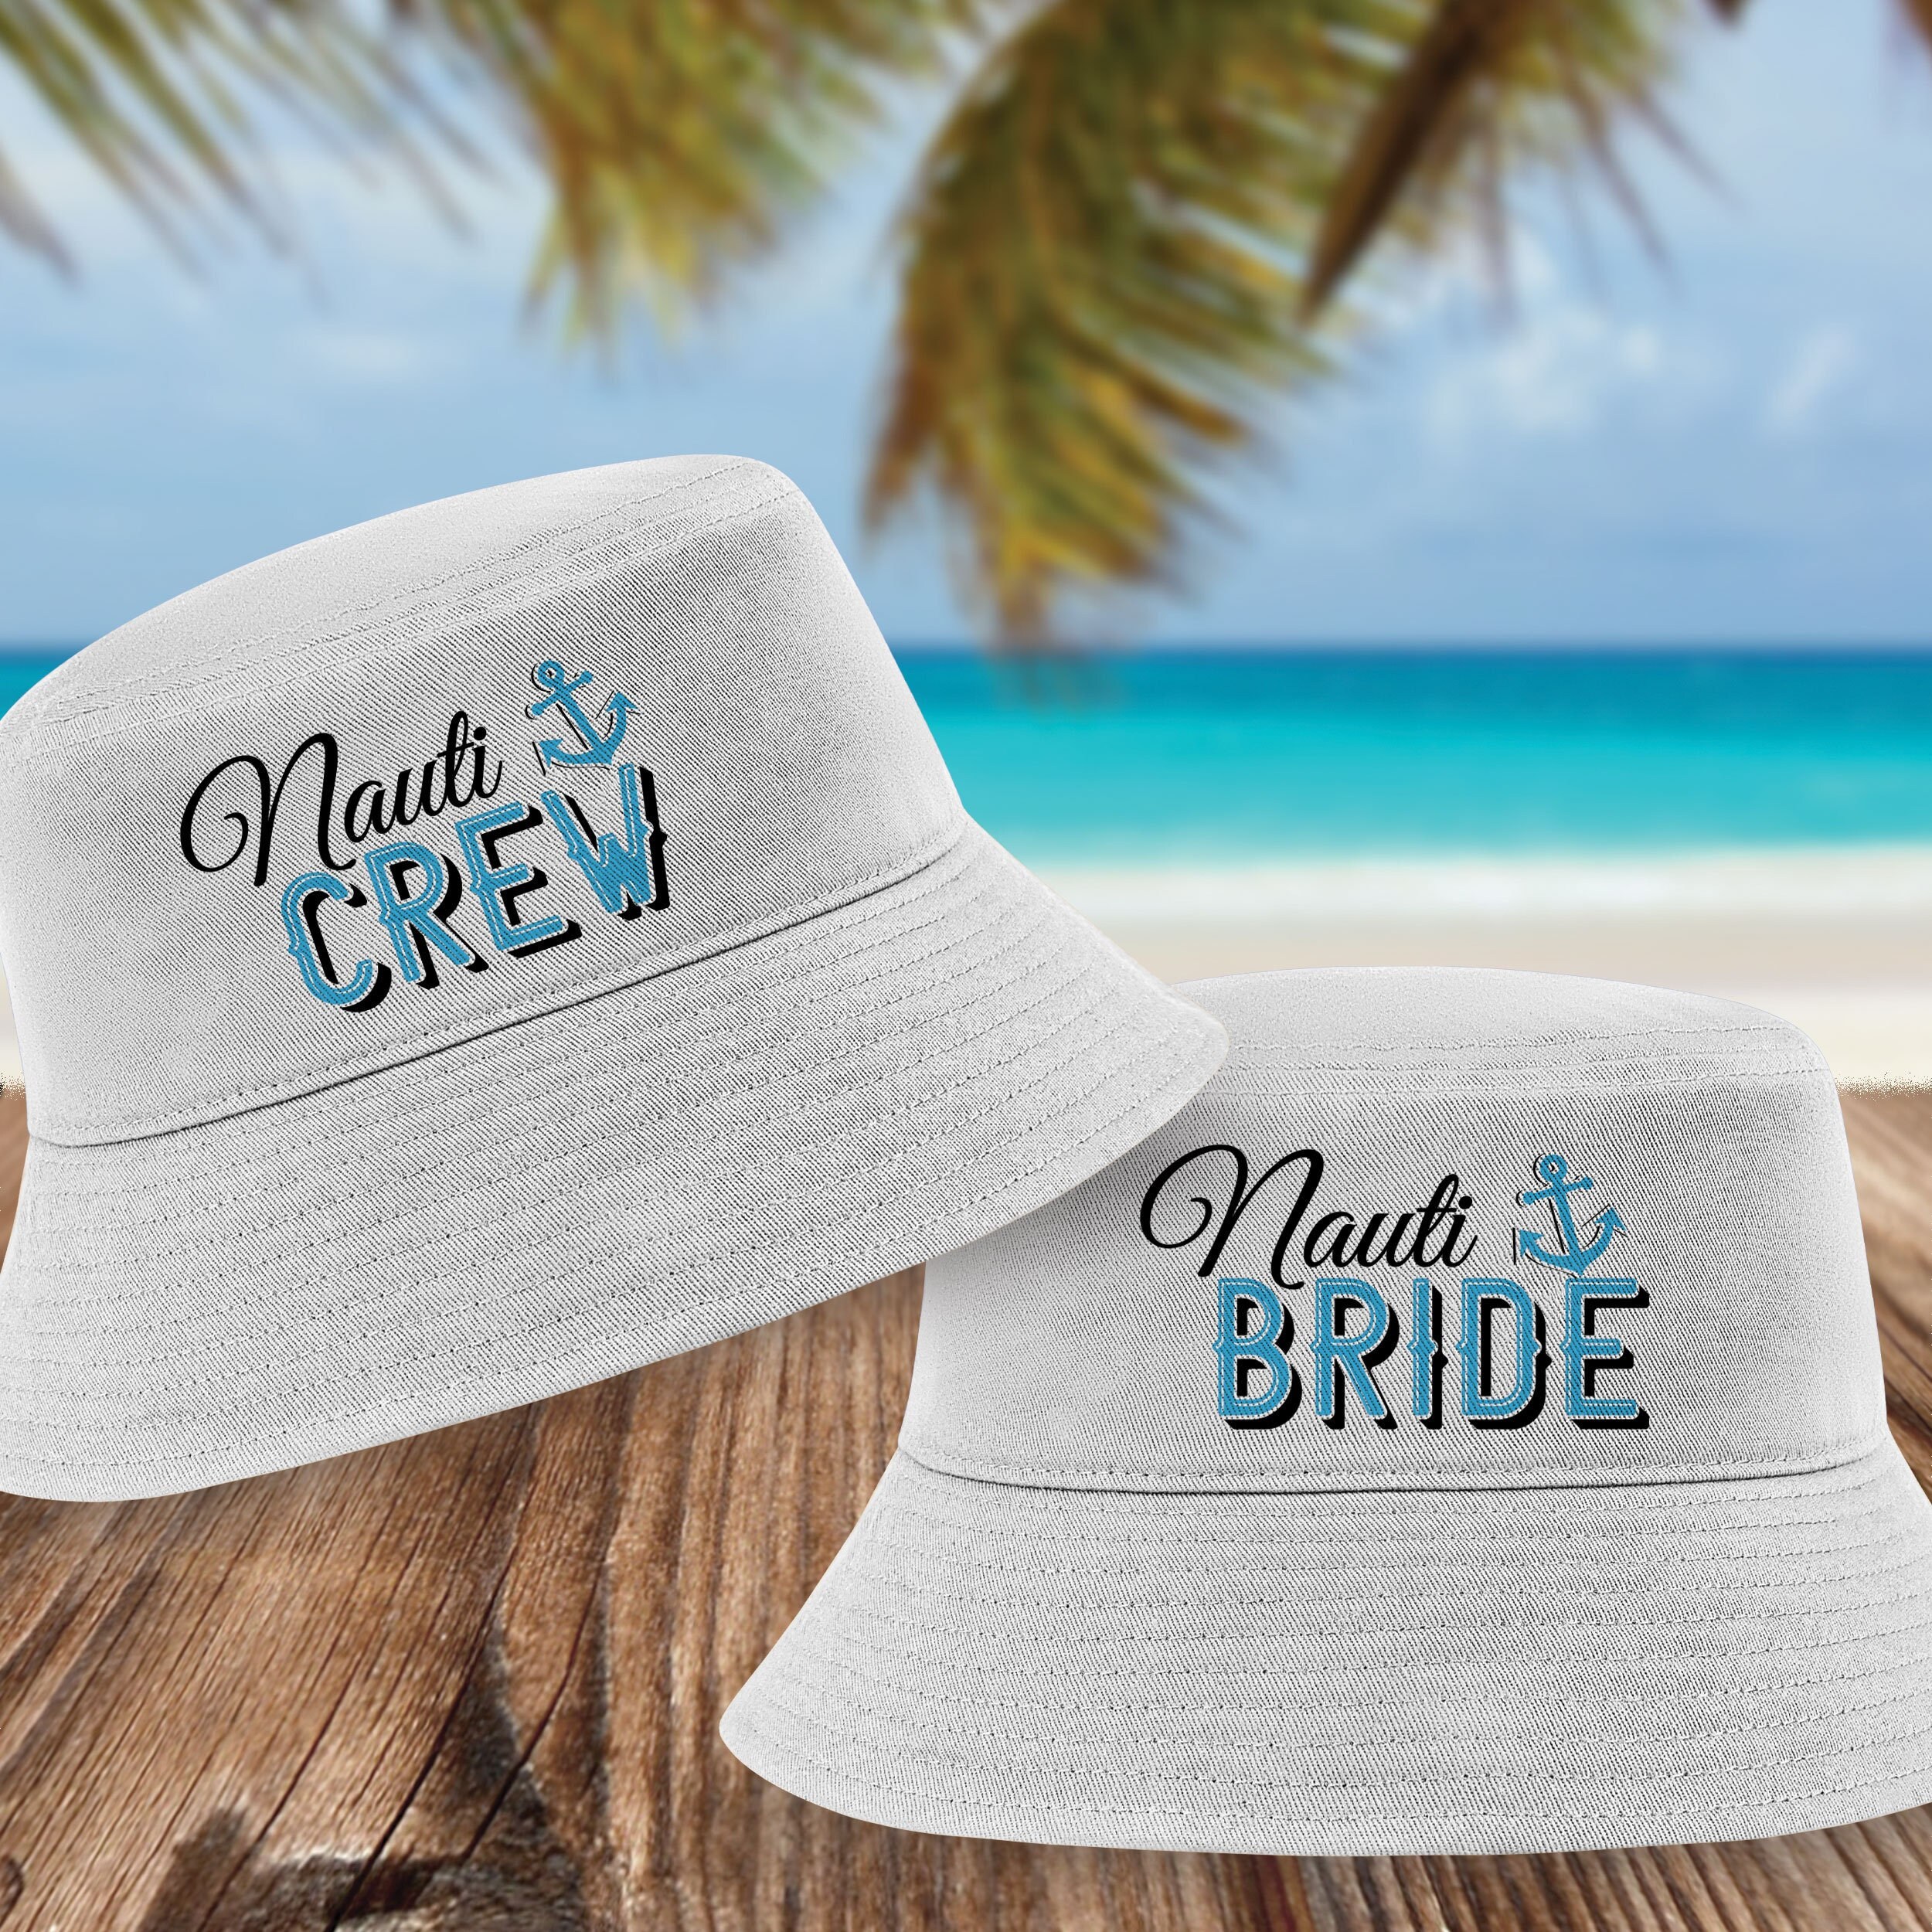 Boat Bucket Hats for Nautical Bachelorette - Cruise Trip Gifts - Let's Get Ship Faced + Nauti Crew Bucket Hats - Boat Party Accessories